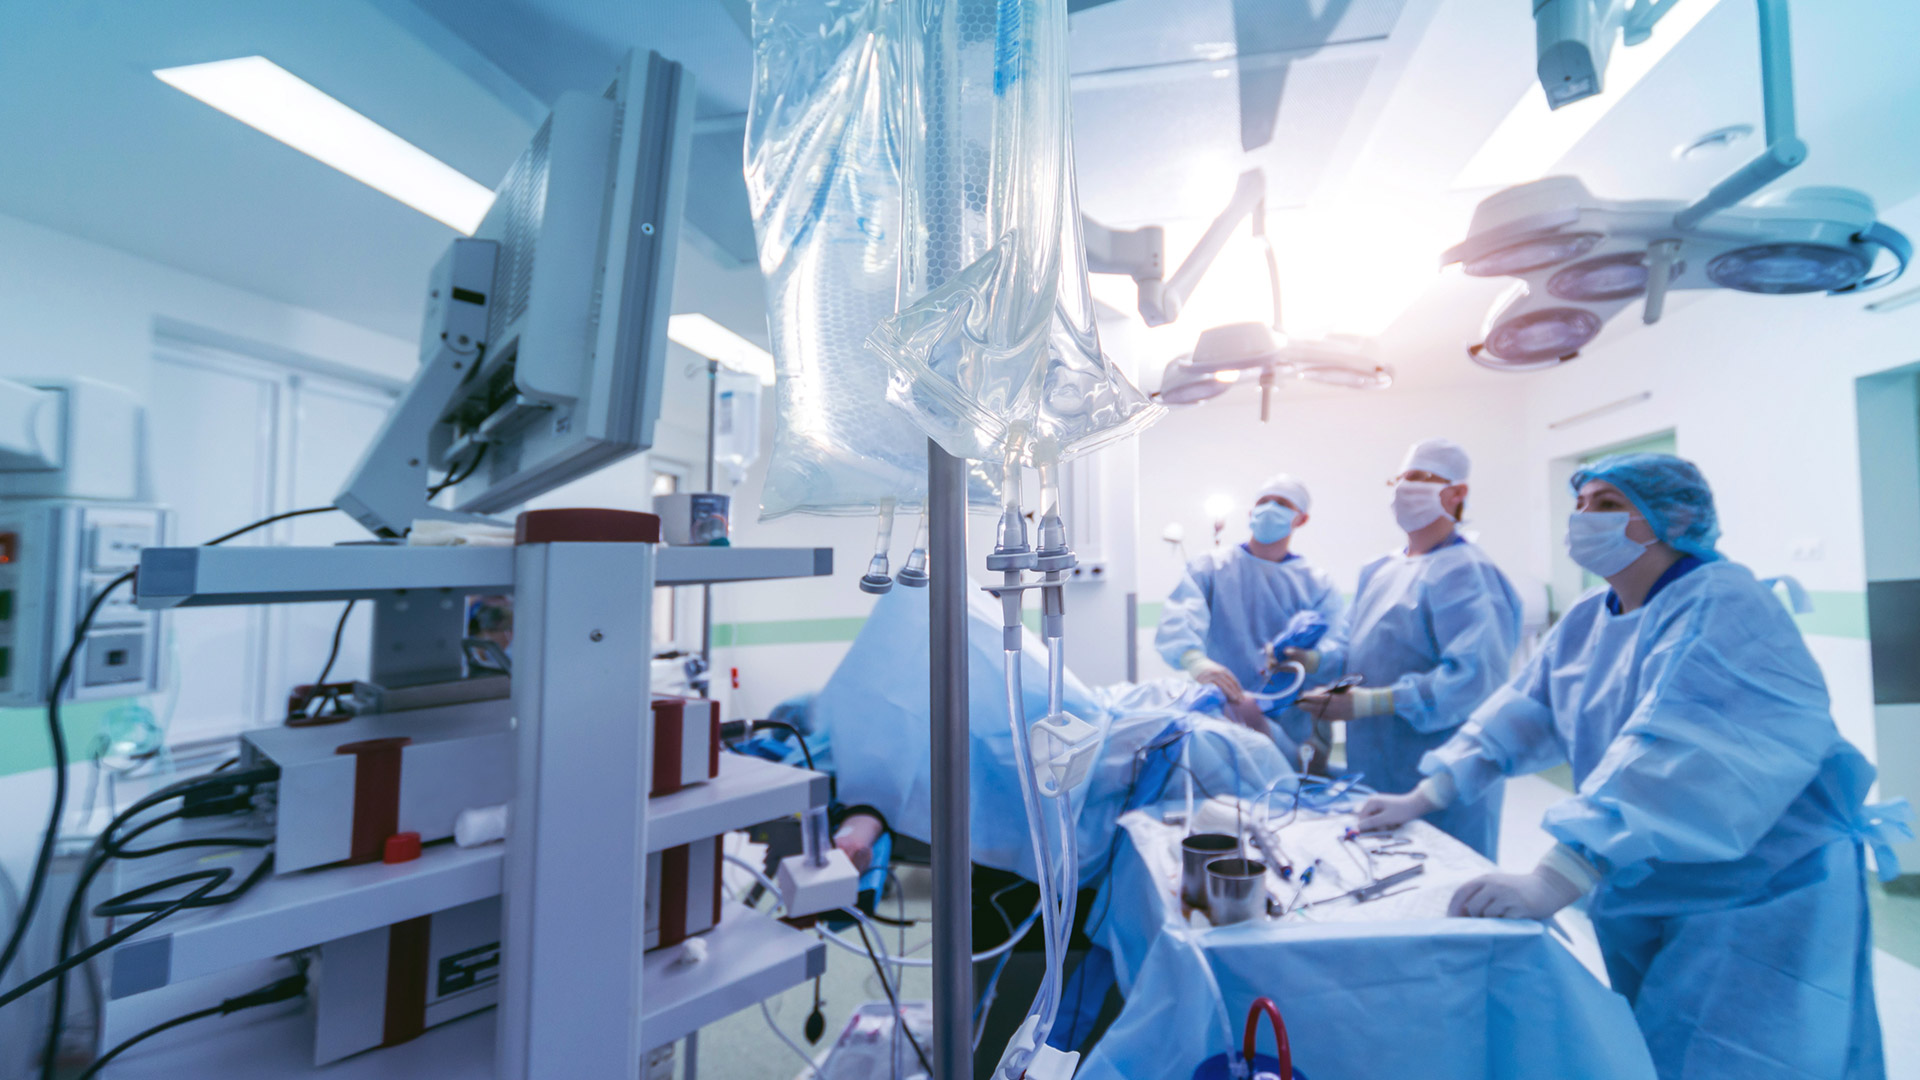 Altia Provides Major Surgical Device Maker with Turnkey Design, Saving Time and Resources